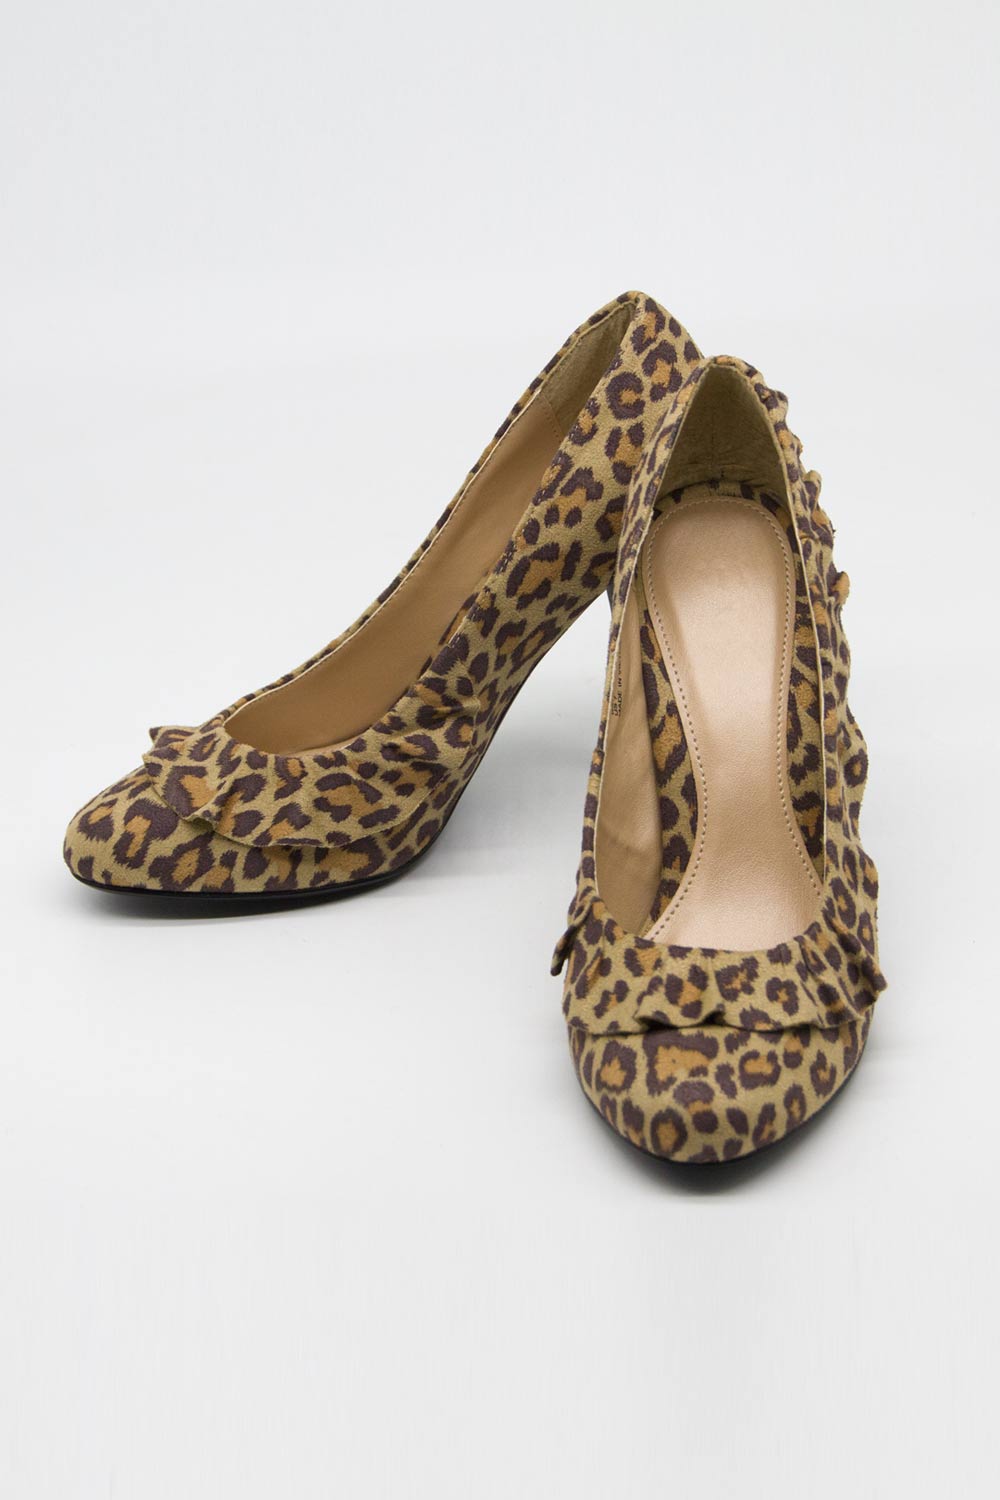 Frill Detailed Heeled Shoes (Leopard)